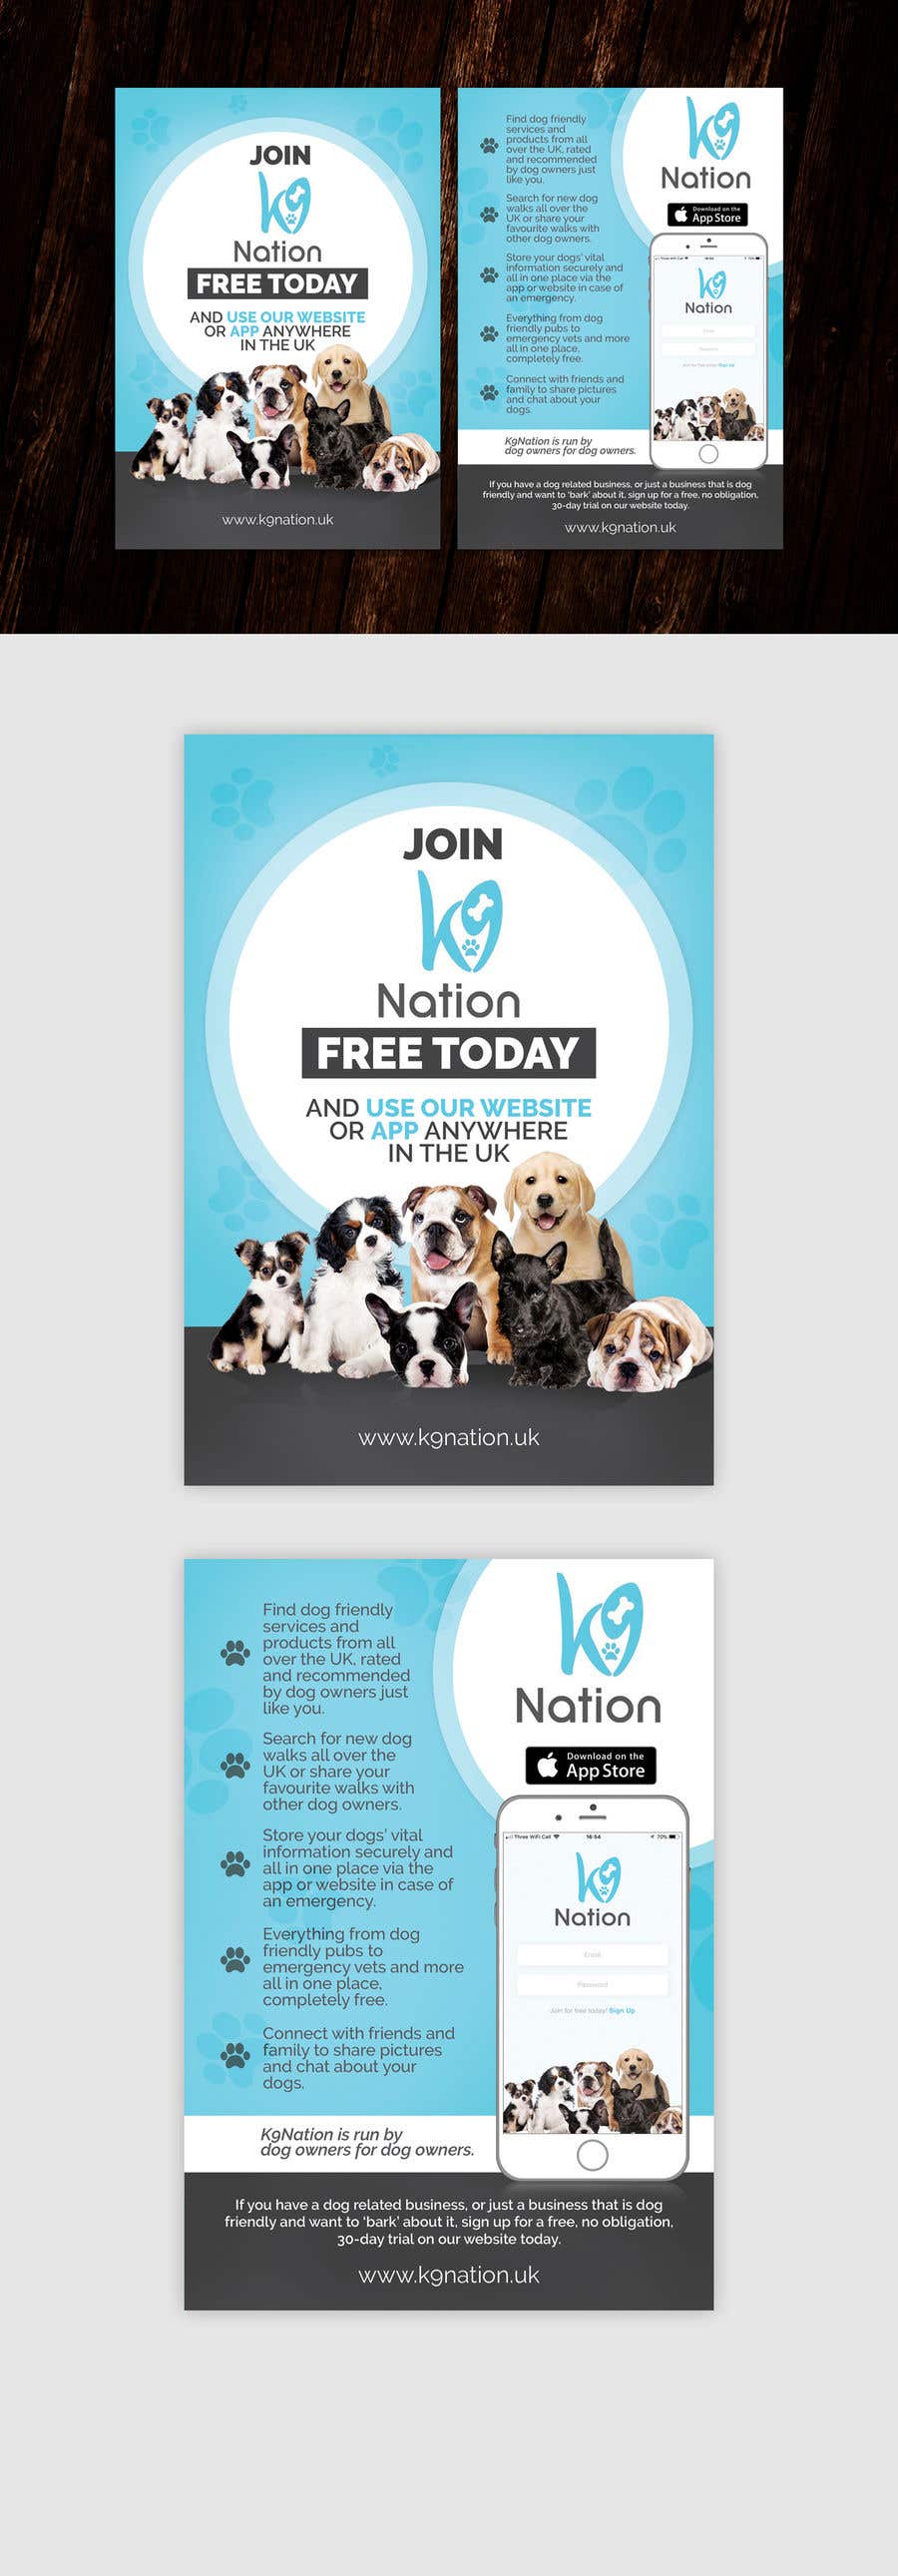 Contest Entry #3 for                                                 Design an eye-catching A5 flyer for print to attract dog owners attention
                                            